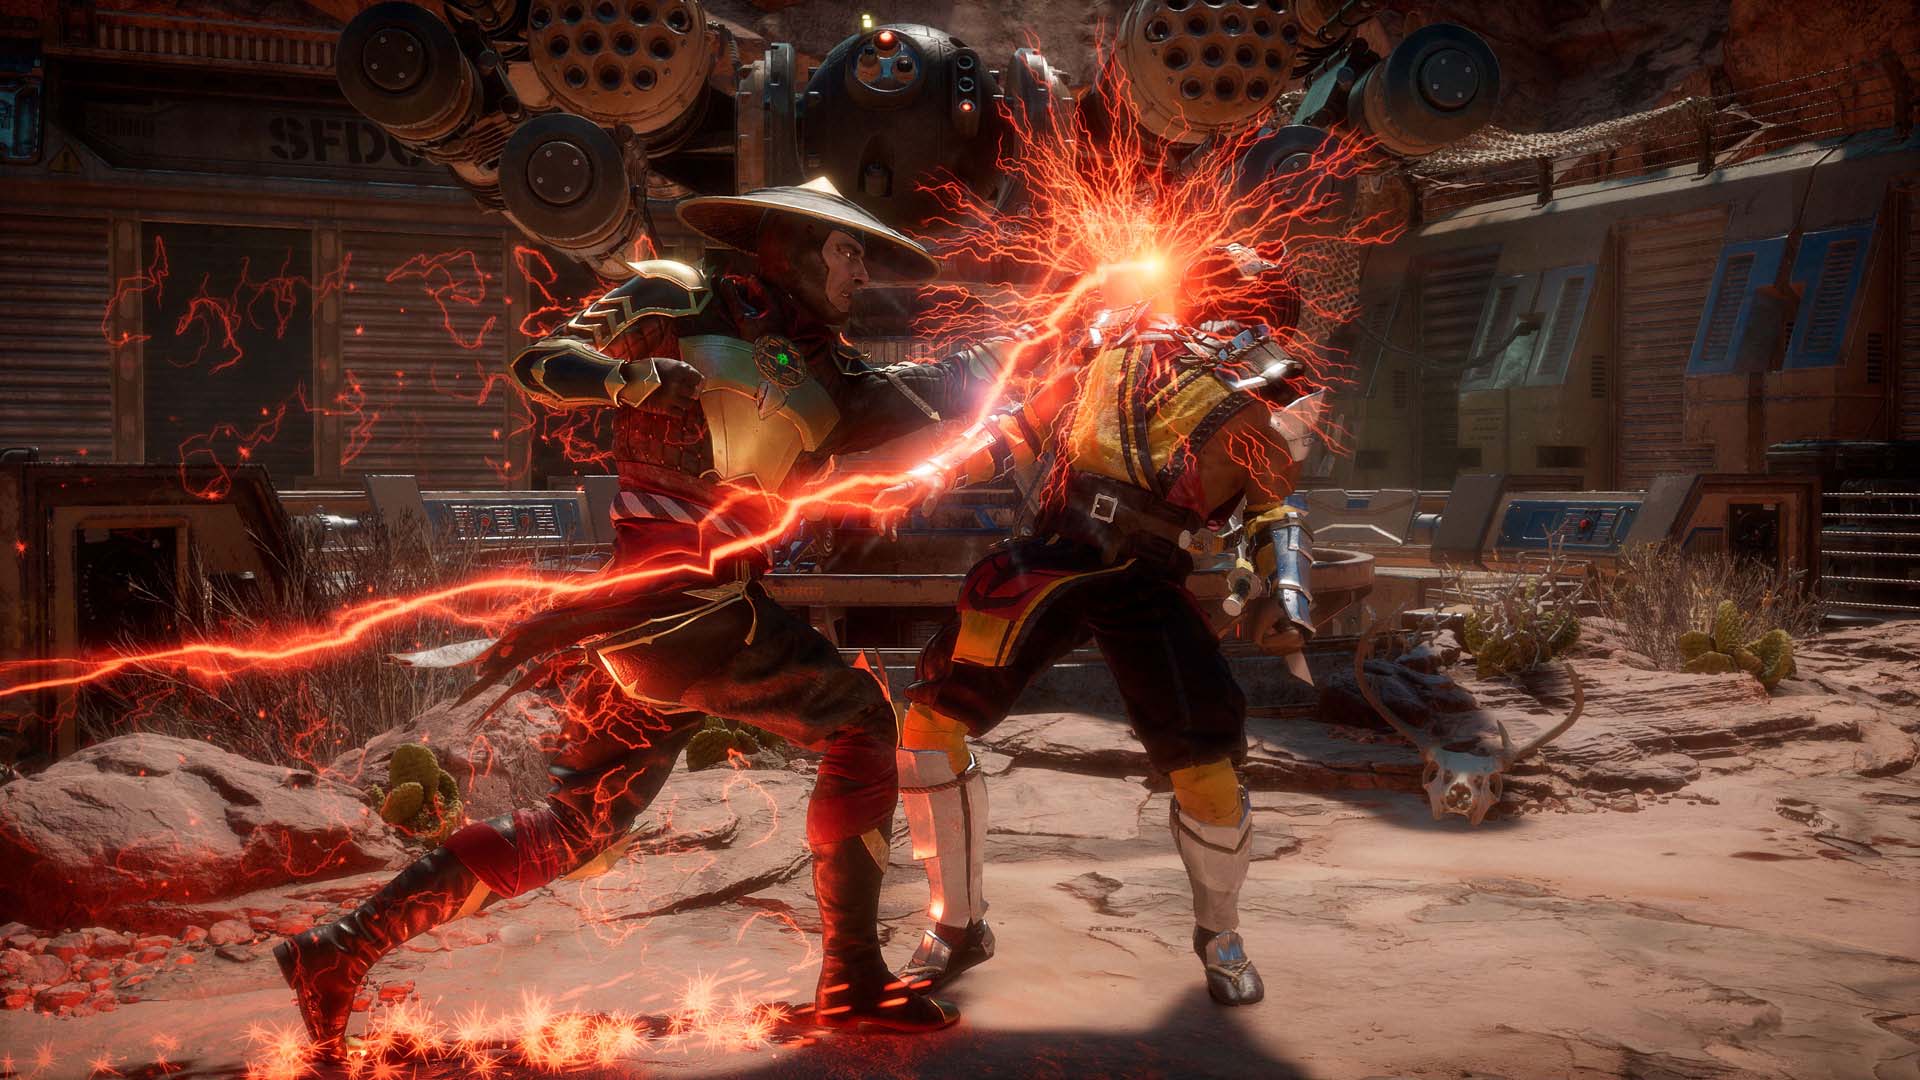 New Update for Mortal Kombat 11 Reduces Towers of Time Difficulty, Gives Away In-Game Currency